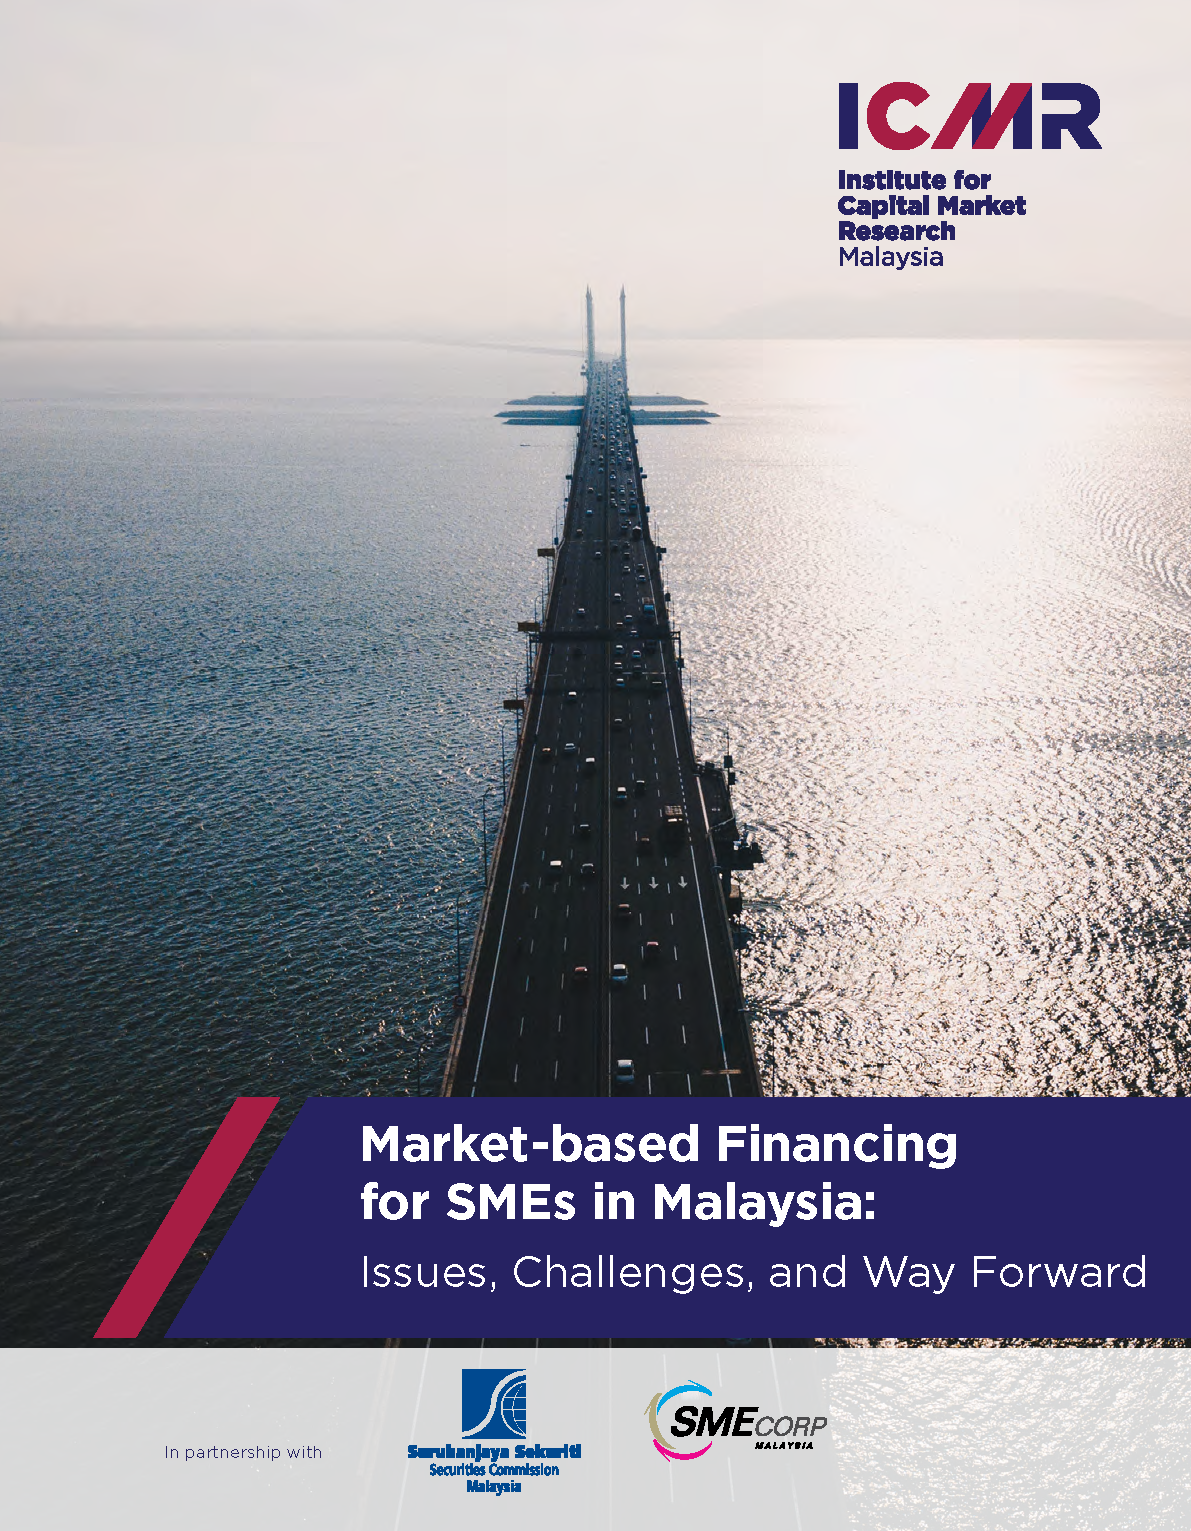 Market-based Financing for SMEs in Malaysia: Issues, Challenges, and Way Forward